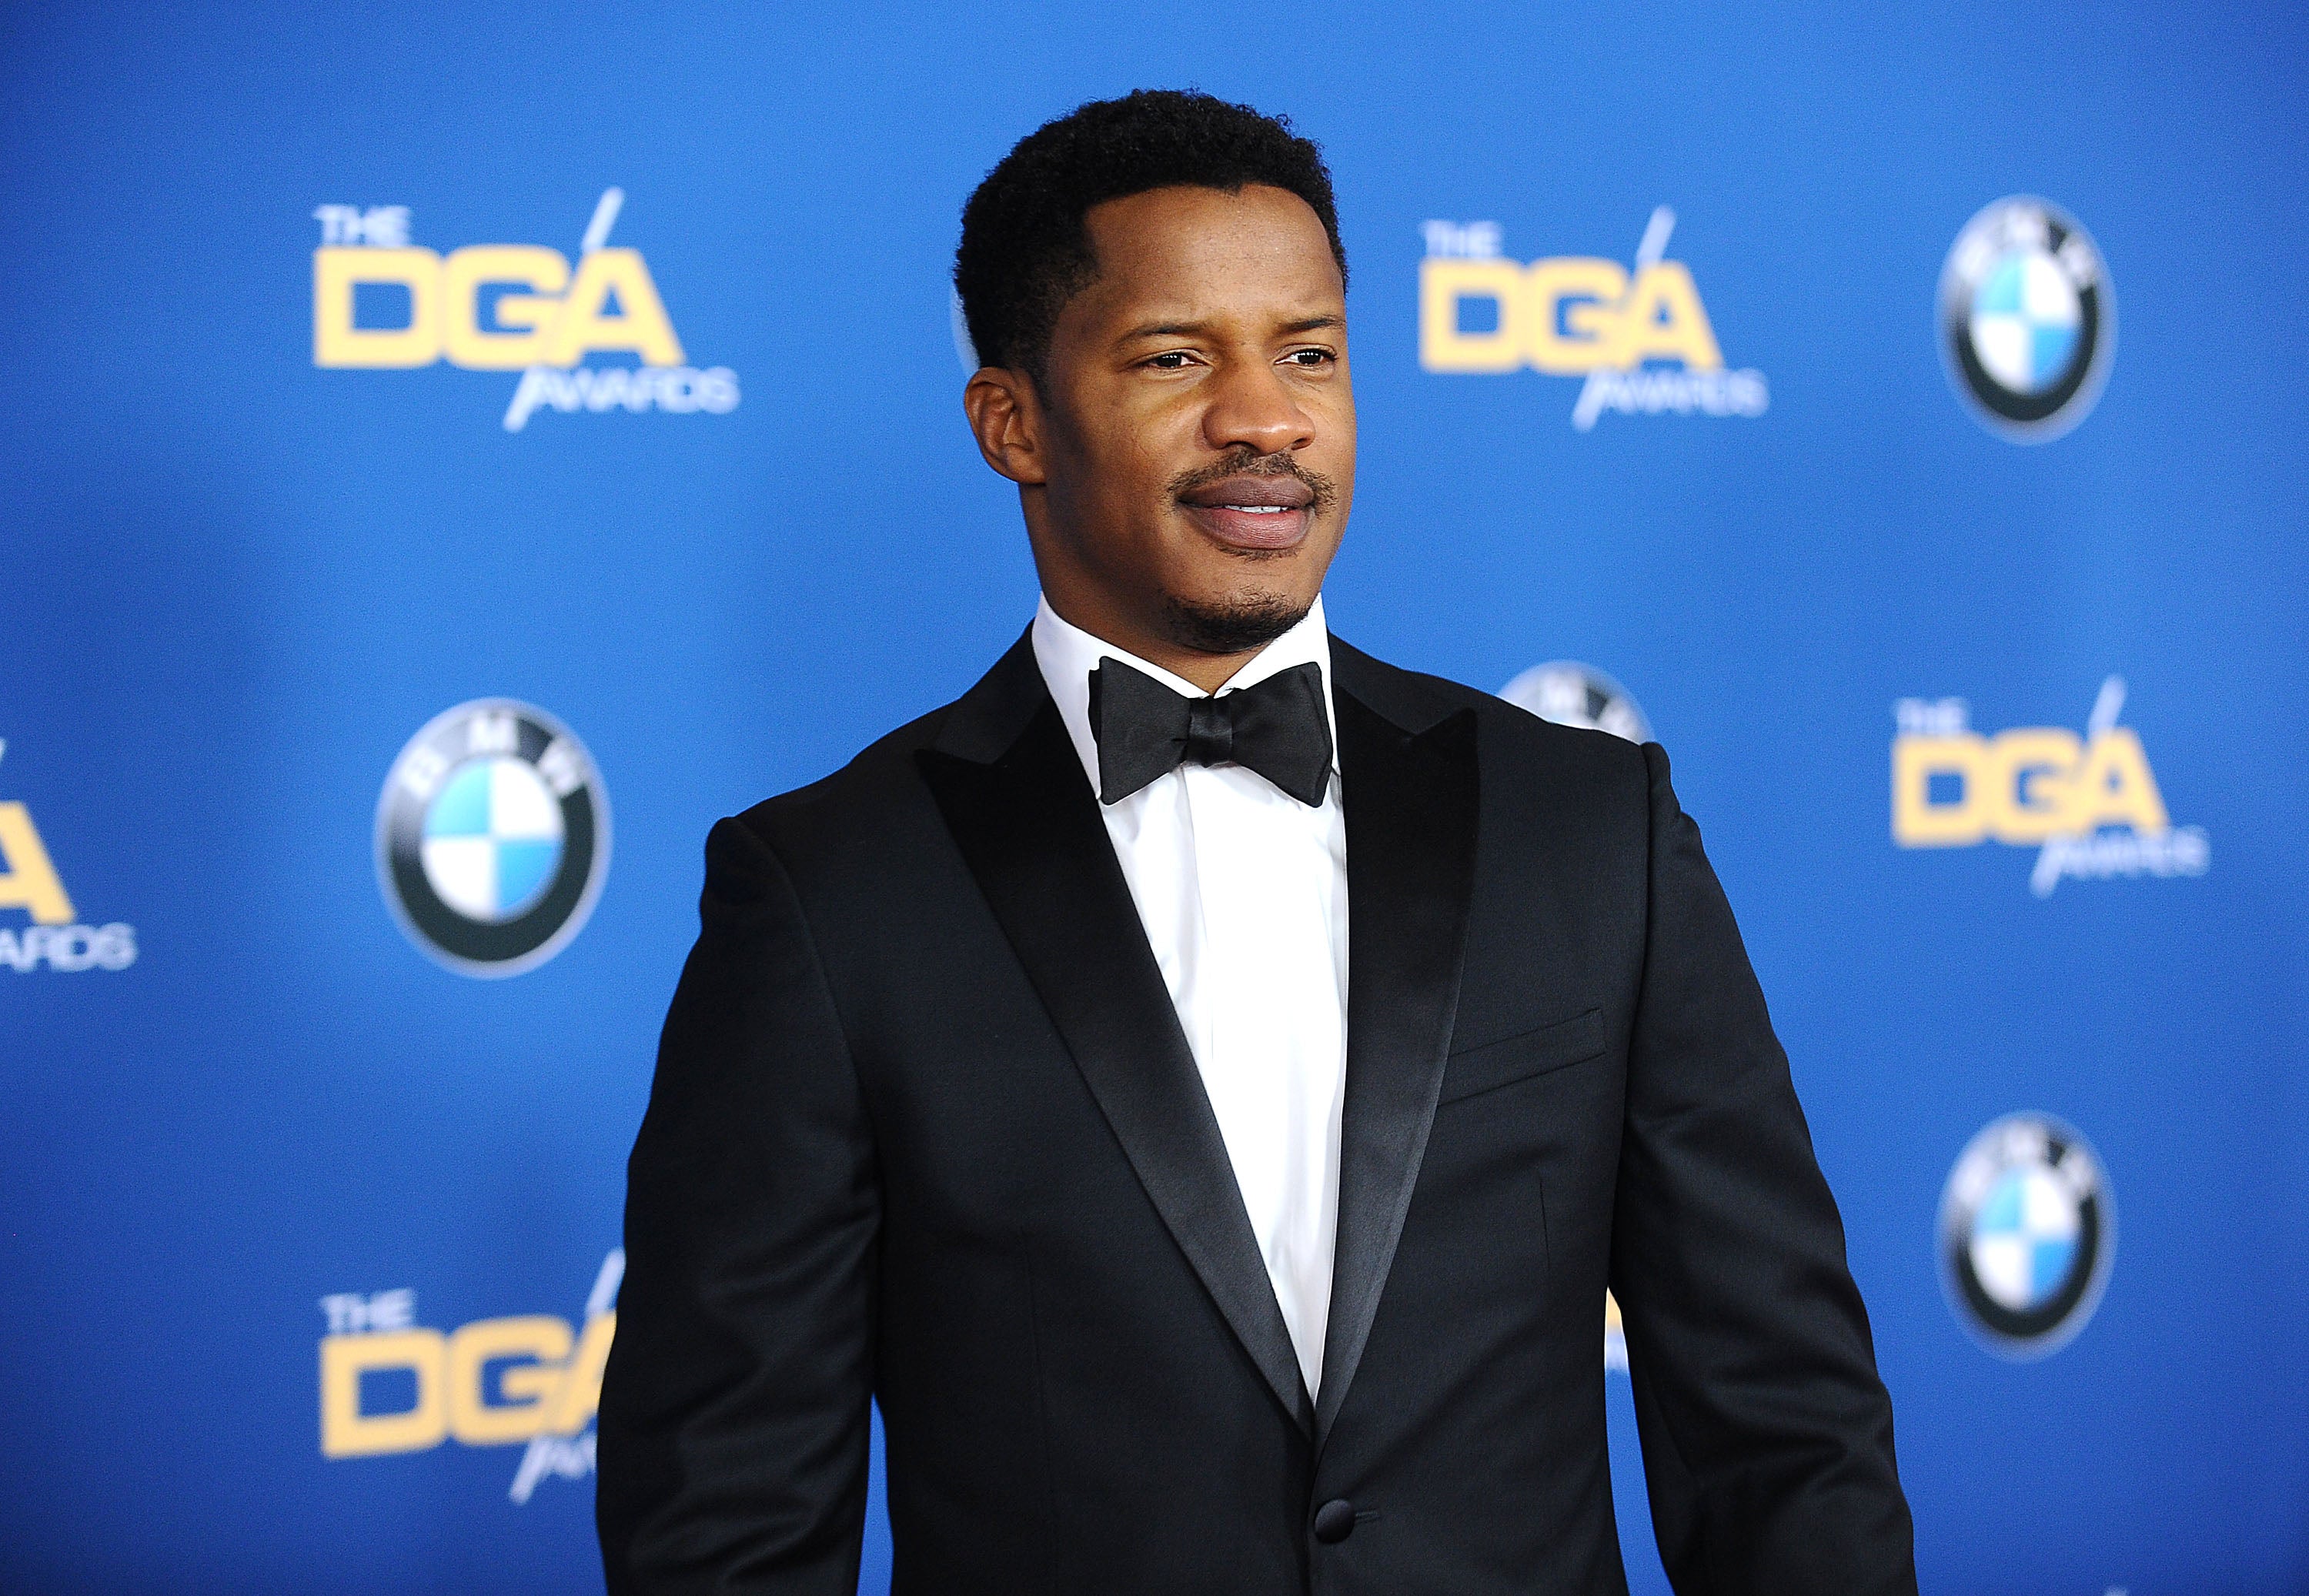 'I Was Acting as If I Was the Victim': Nate Parker Apologizes for 'Insensitive' Response to Rape Case Controversy
